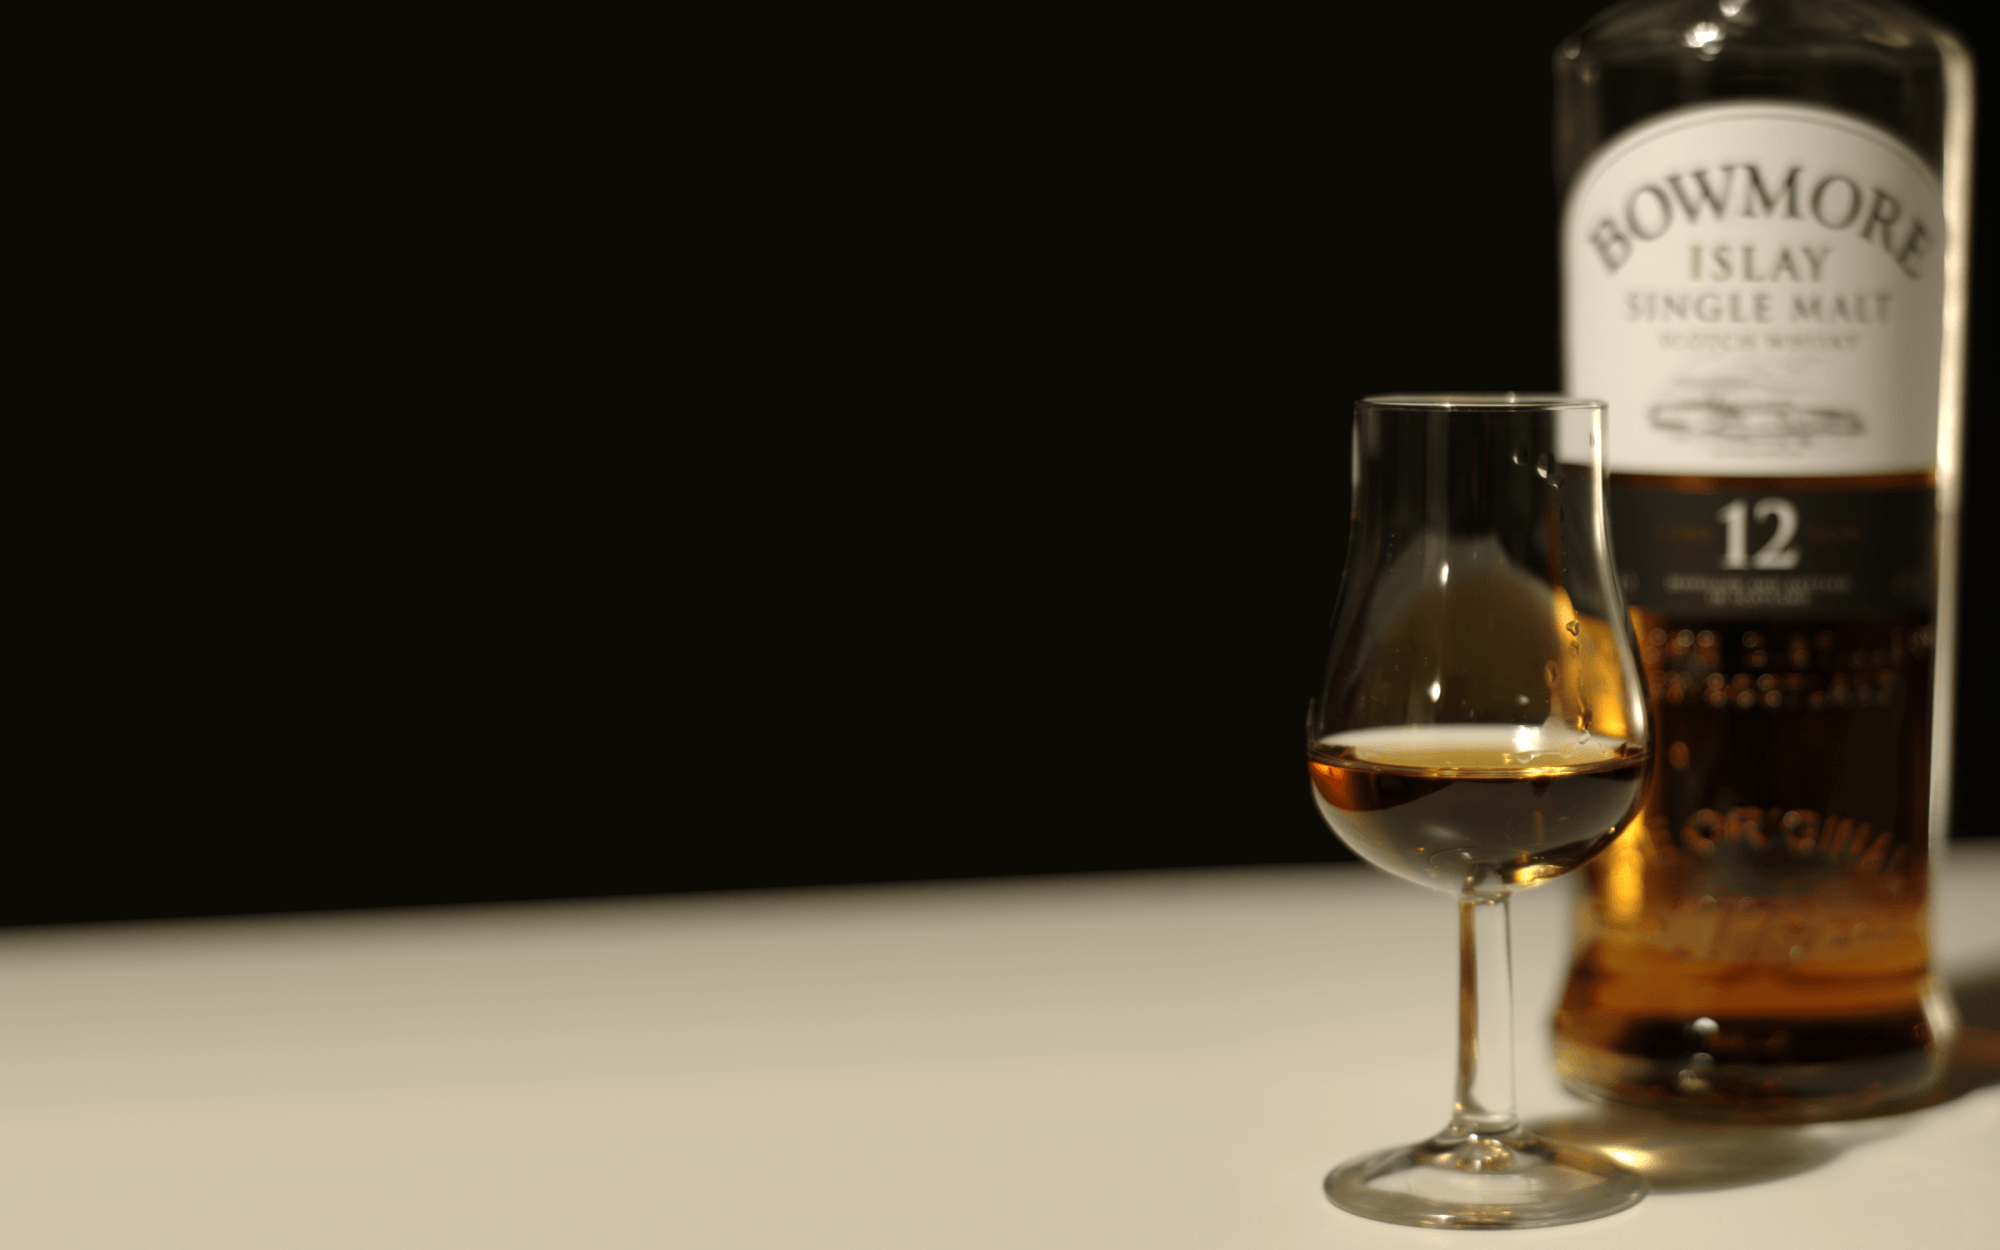 Whisky HD Wallpaper and Background Image